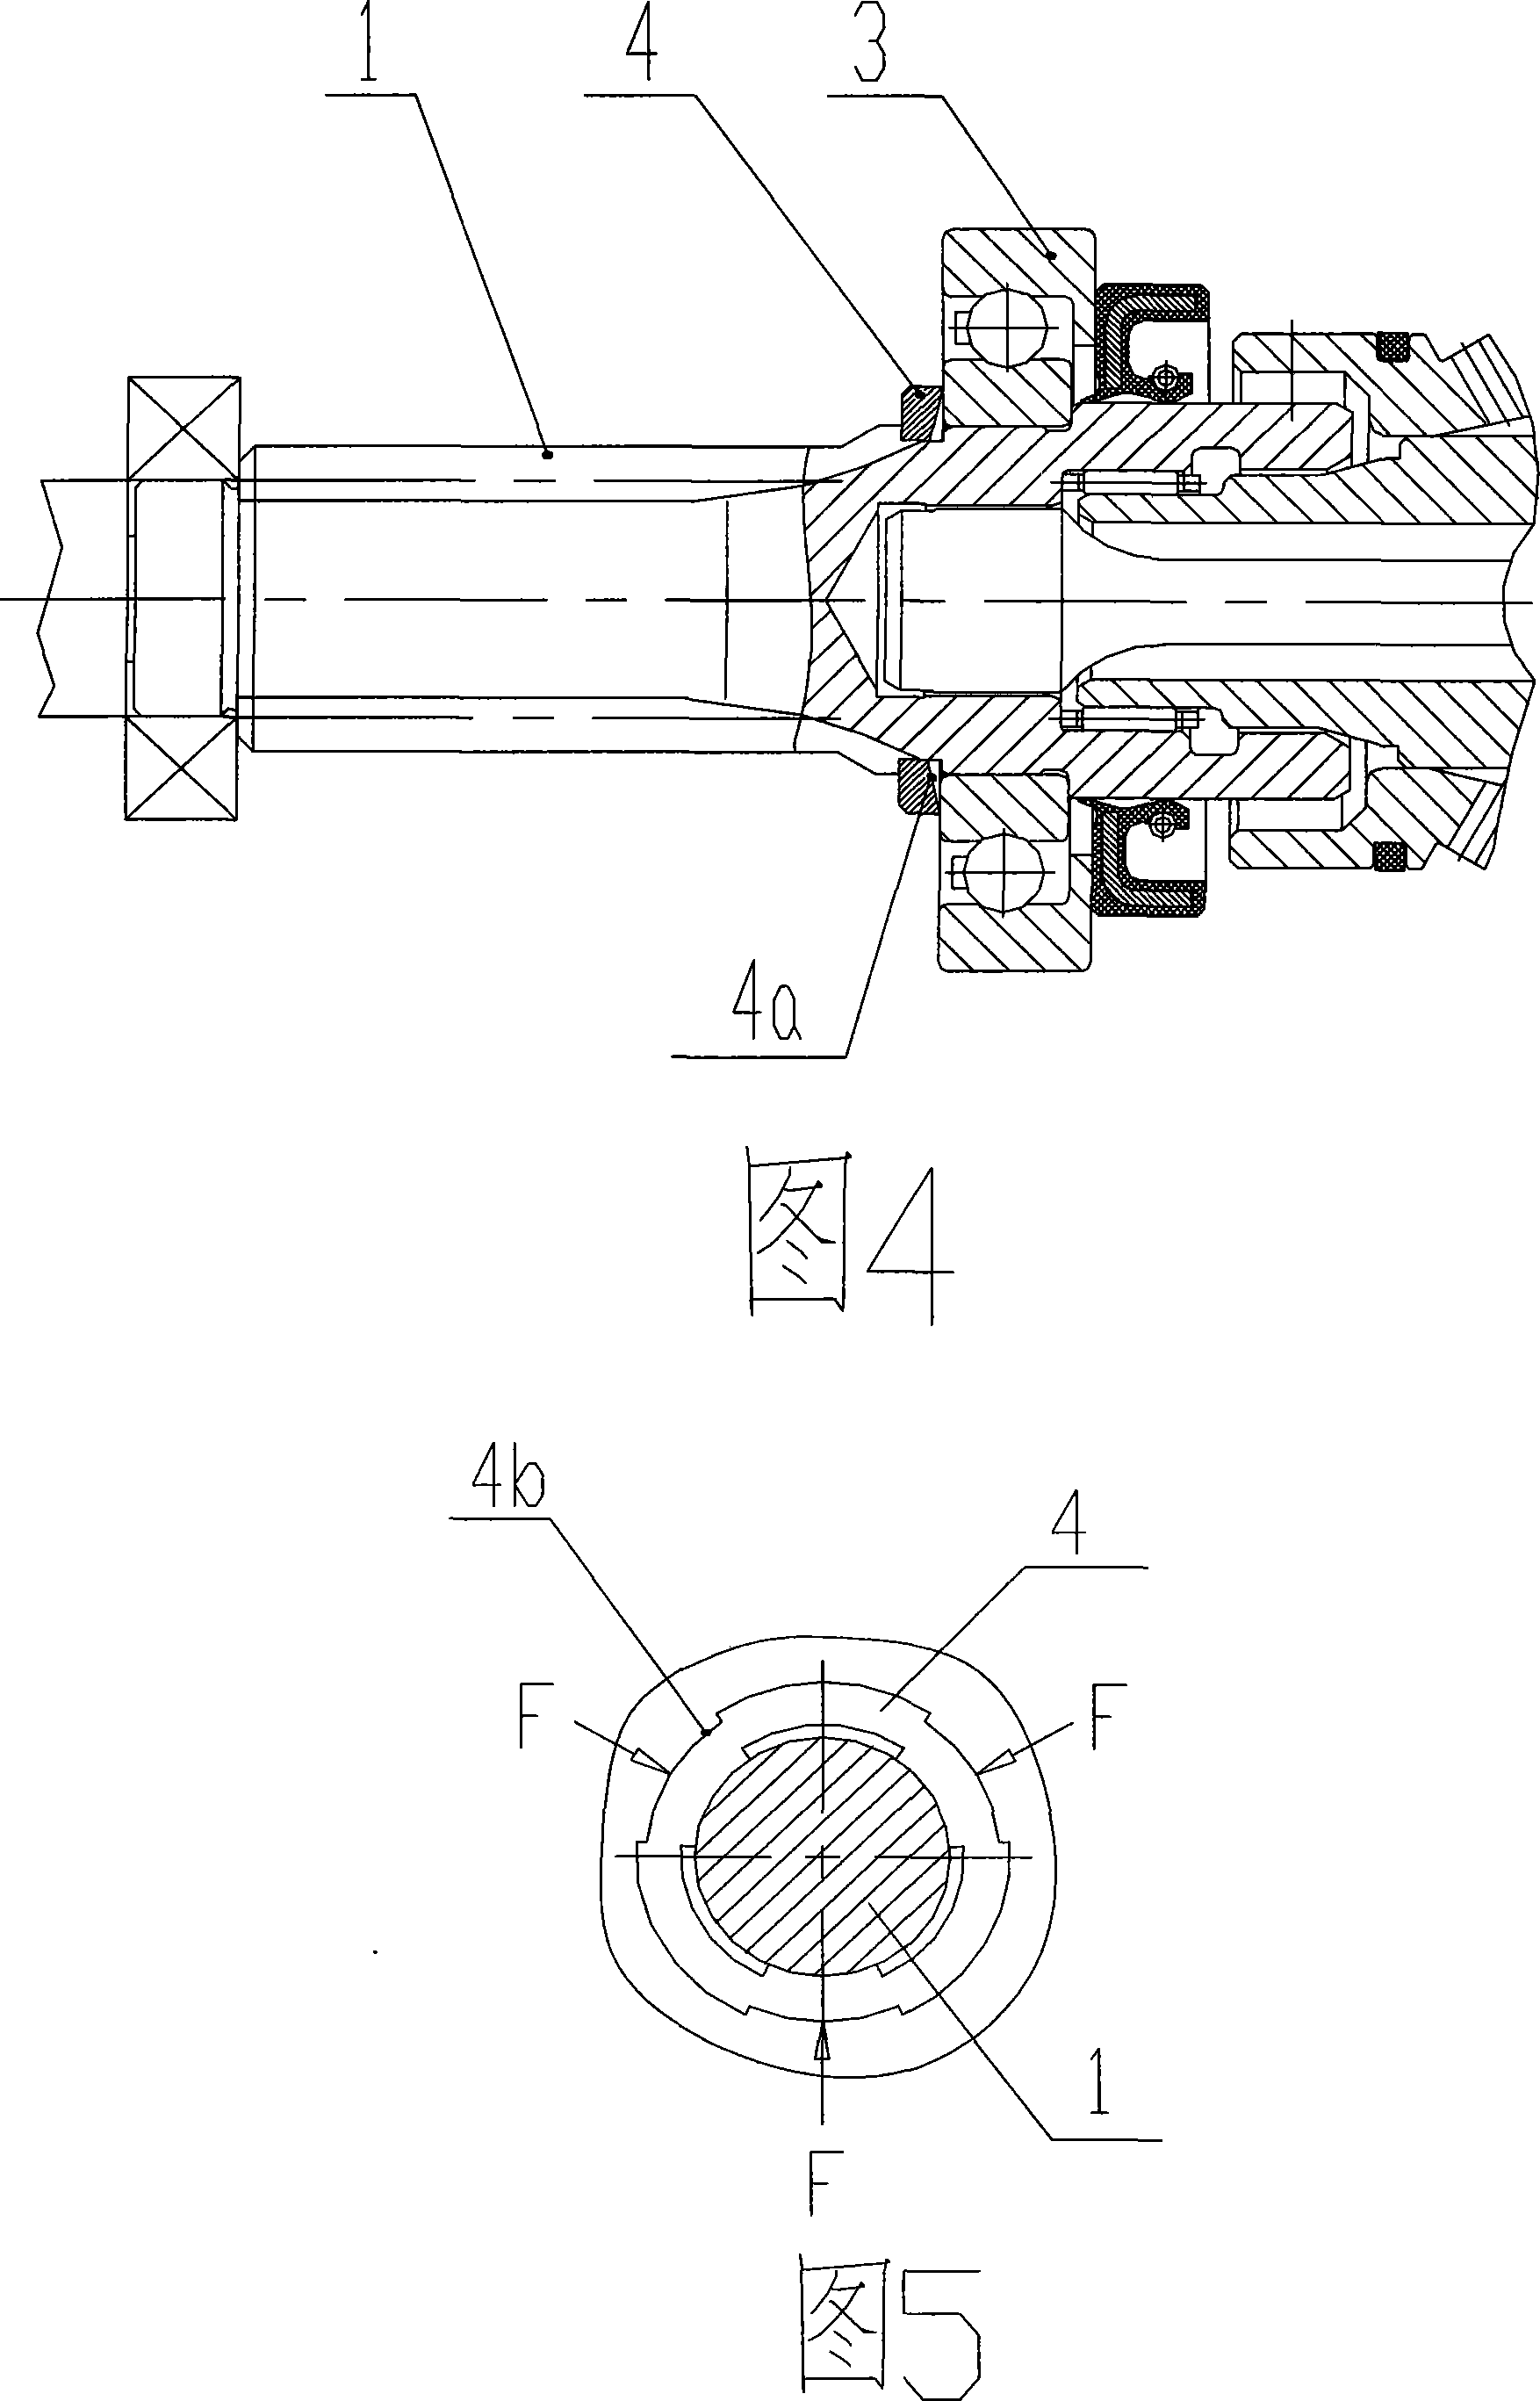 Method for fixed upper bearing of axial parts